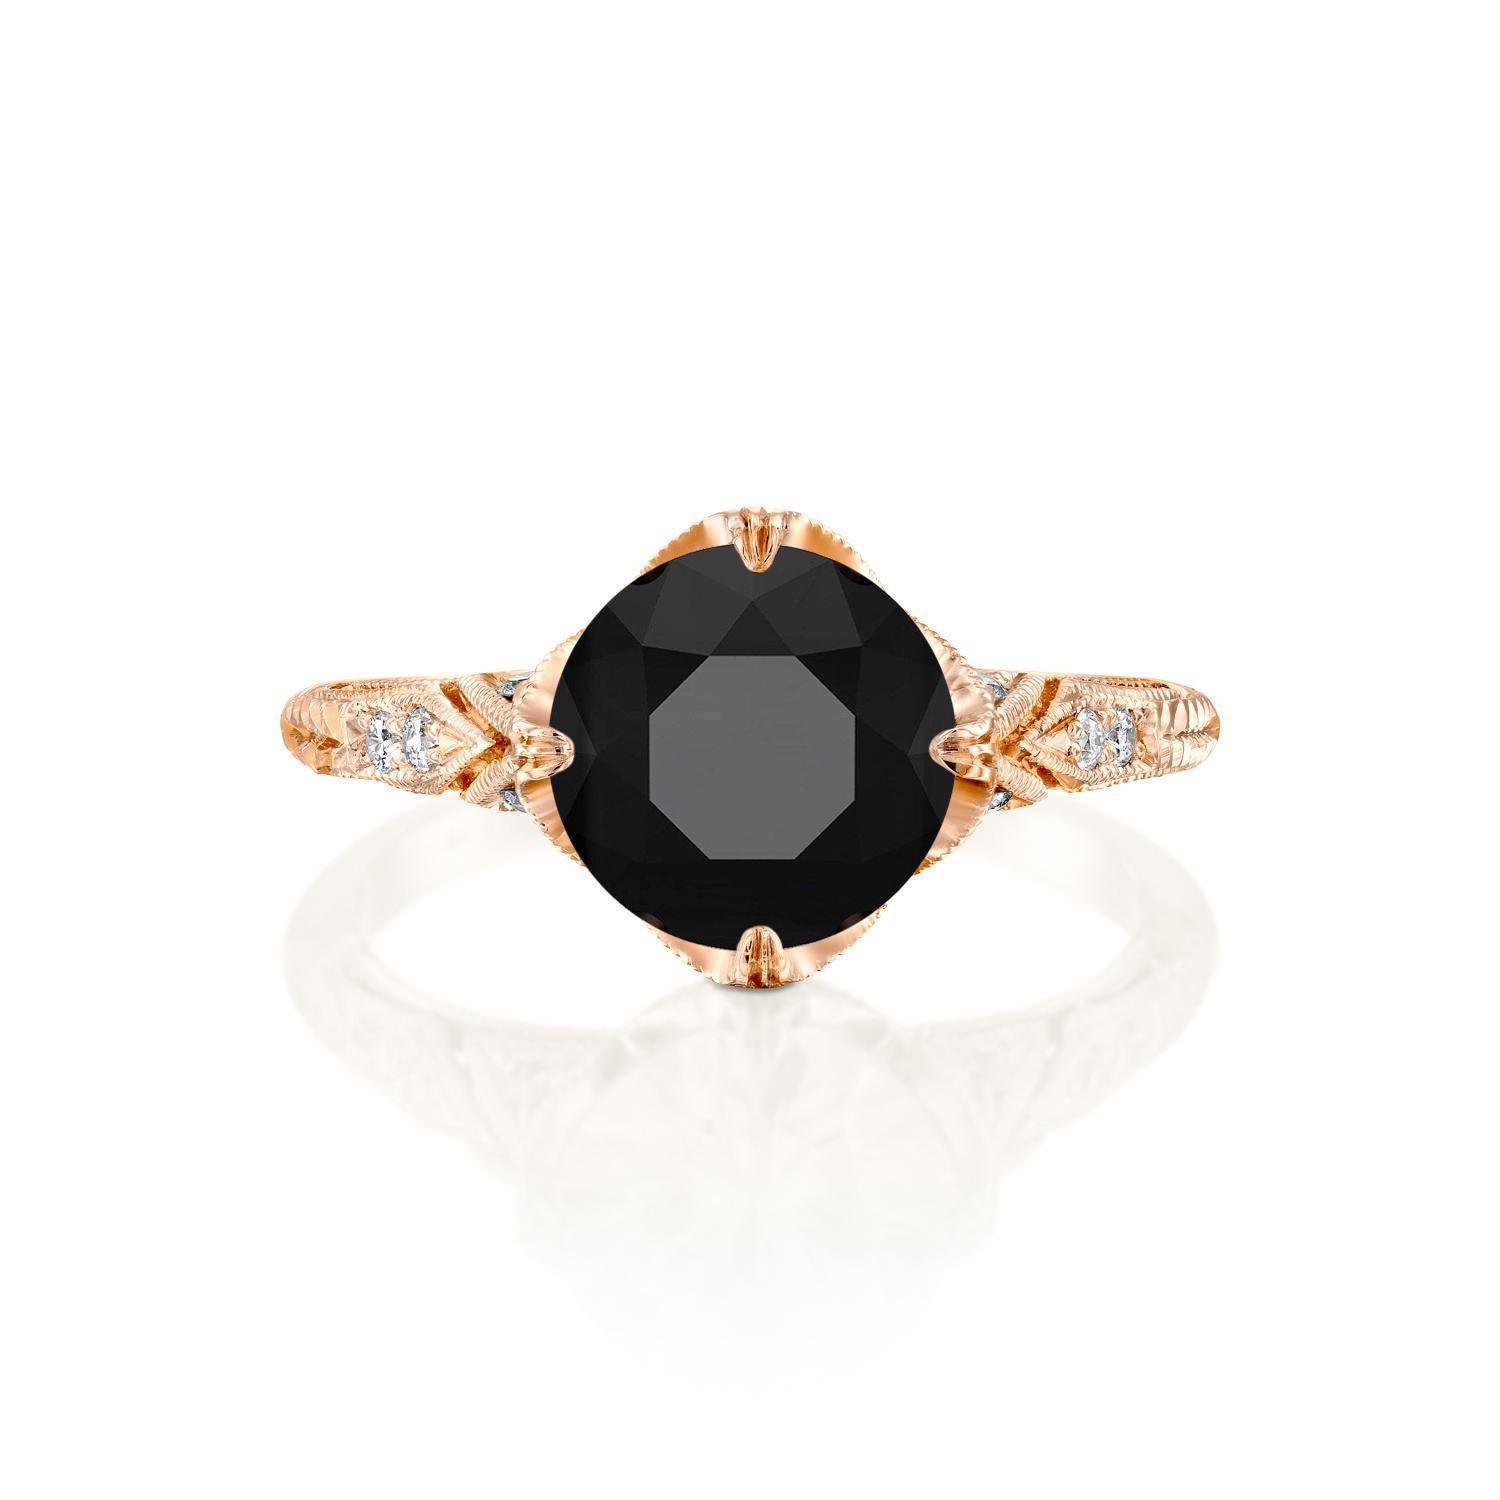 Beautiful solitaire with accents black diamond engagement ring. Center stone is natural, round shaped, black color AAA quality 3 carat diamond surrounded by smaller natural round diamonds of 0.2 total carat weight. The total carat weight of this